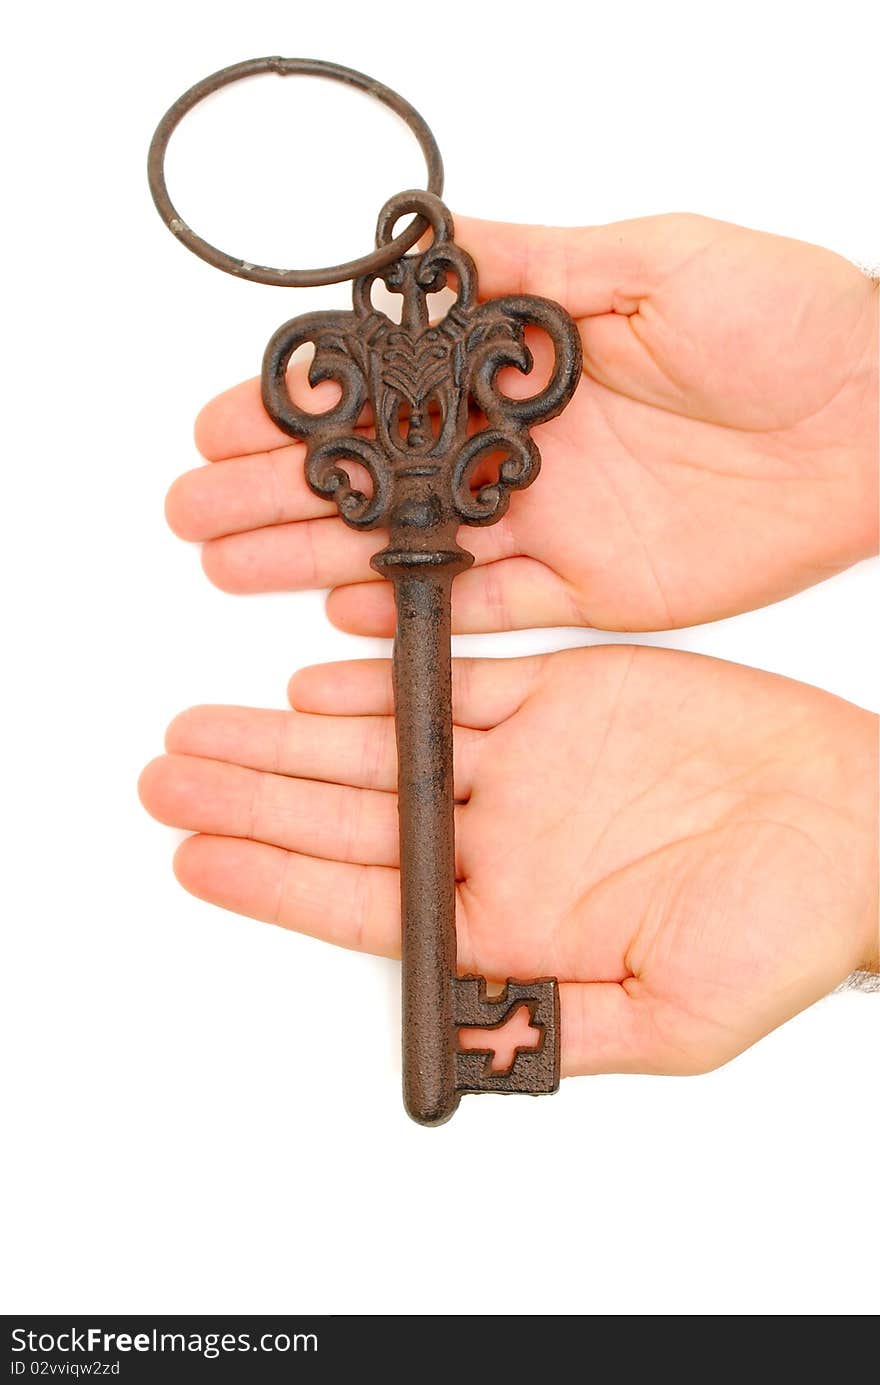 Rustic old key in hands on white background. Rustic old key in hands on white background